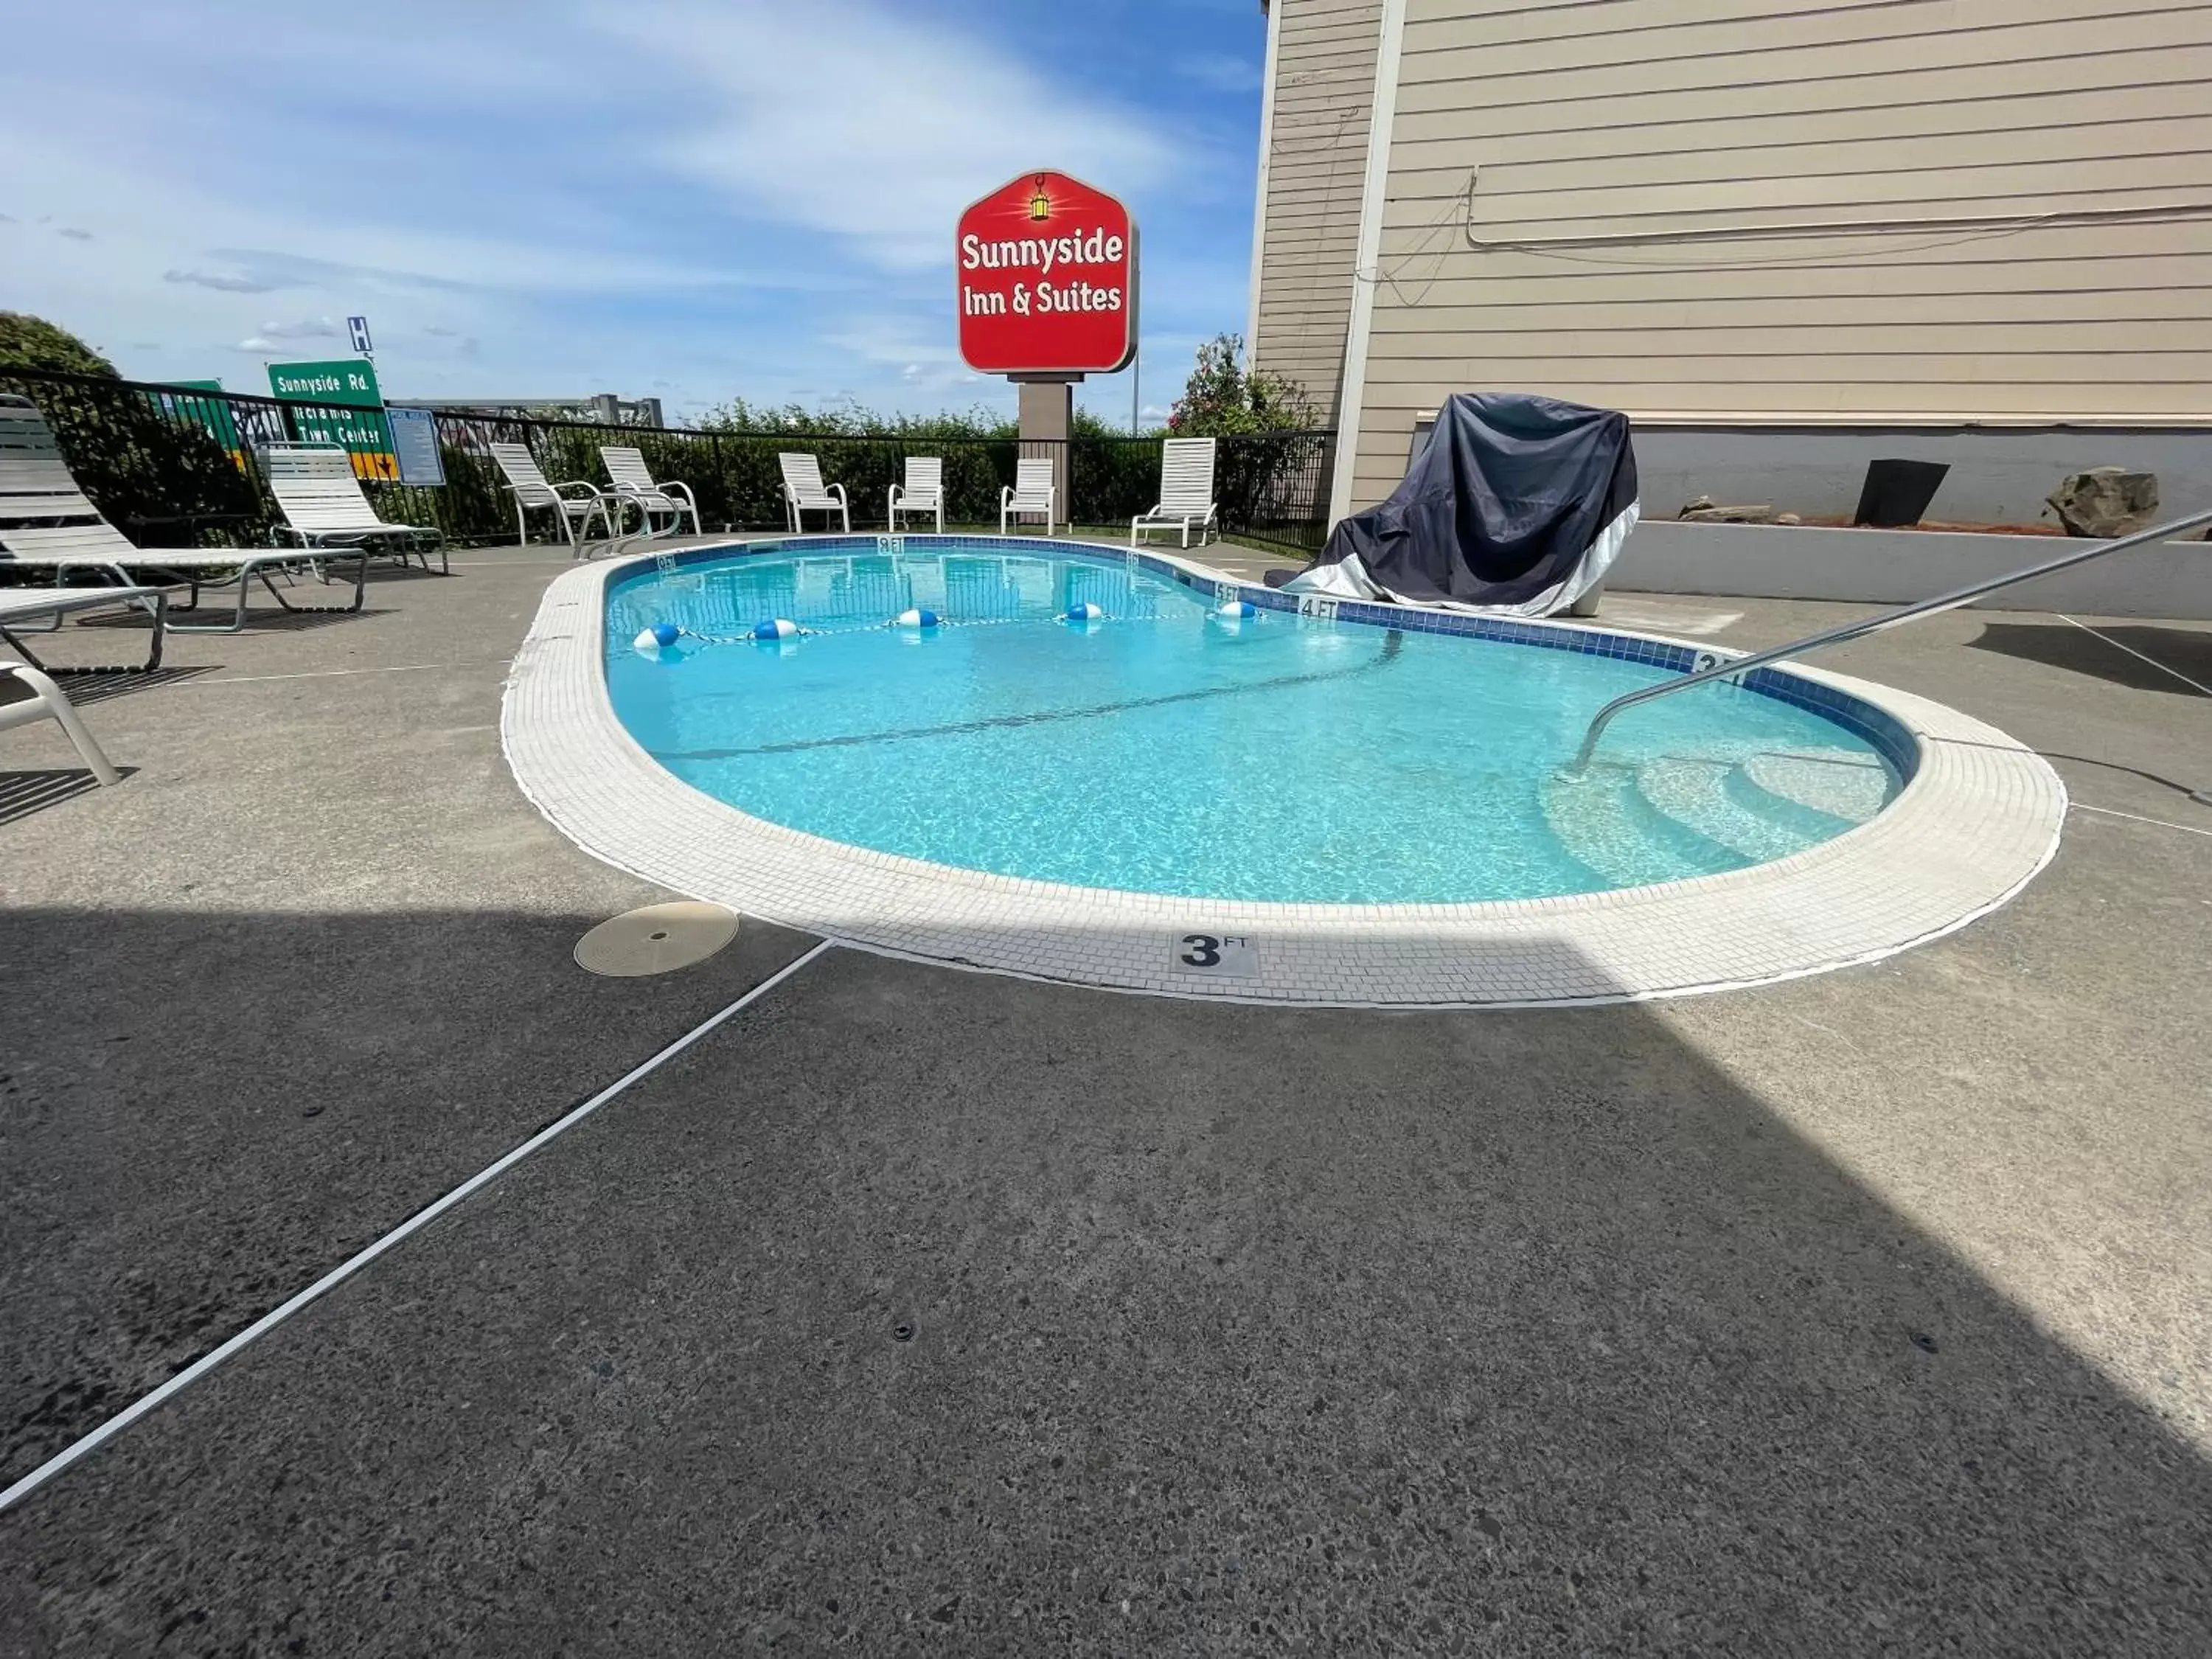 Swimming Pool in Sunnyside Inn and Suites